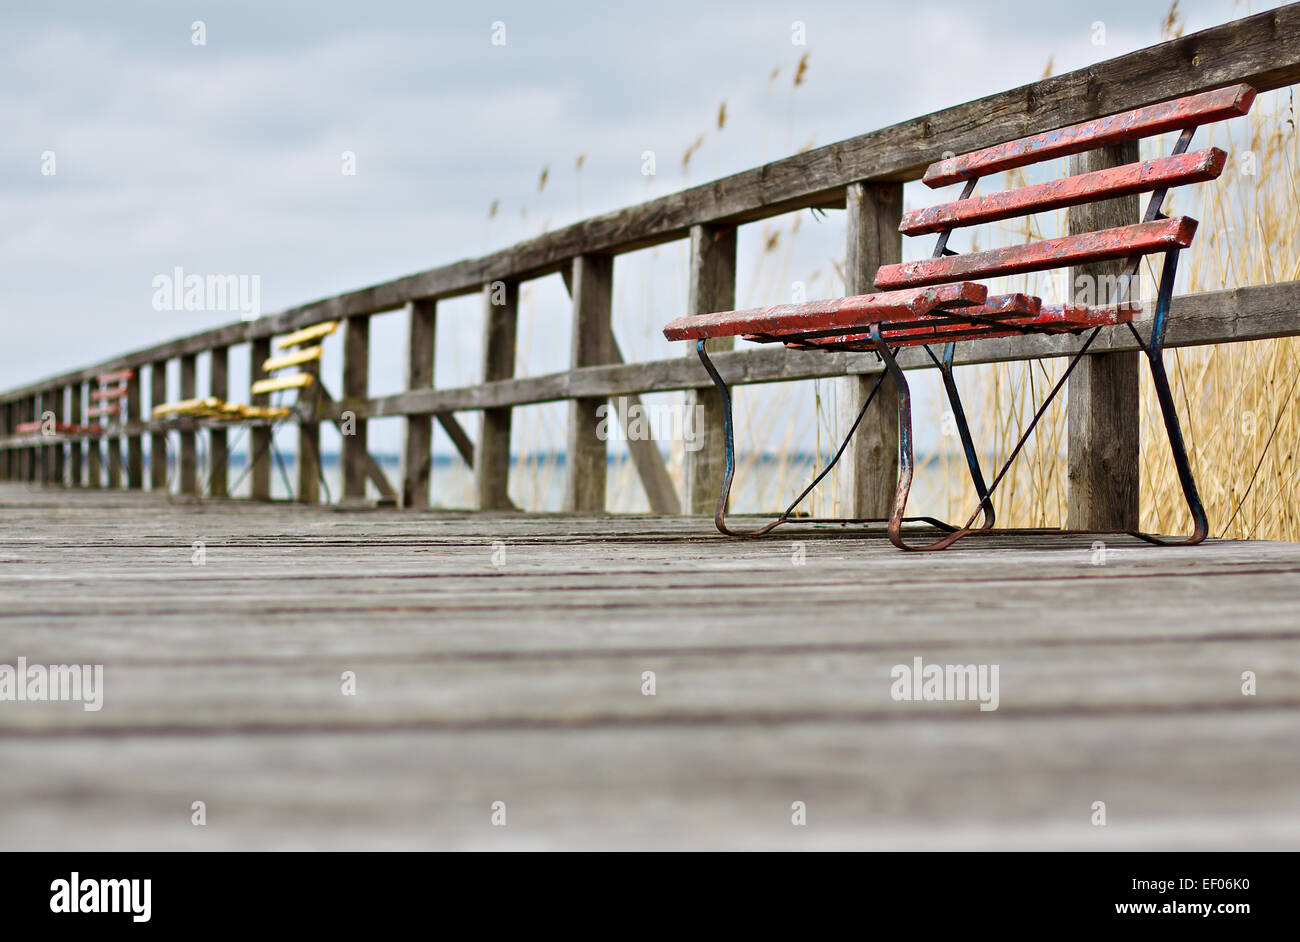 Benches on a dock. Stock Photo